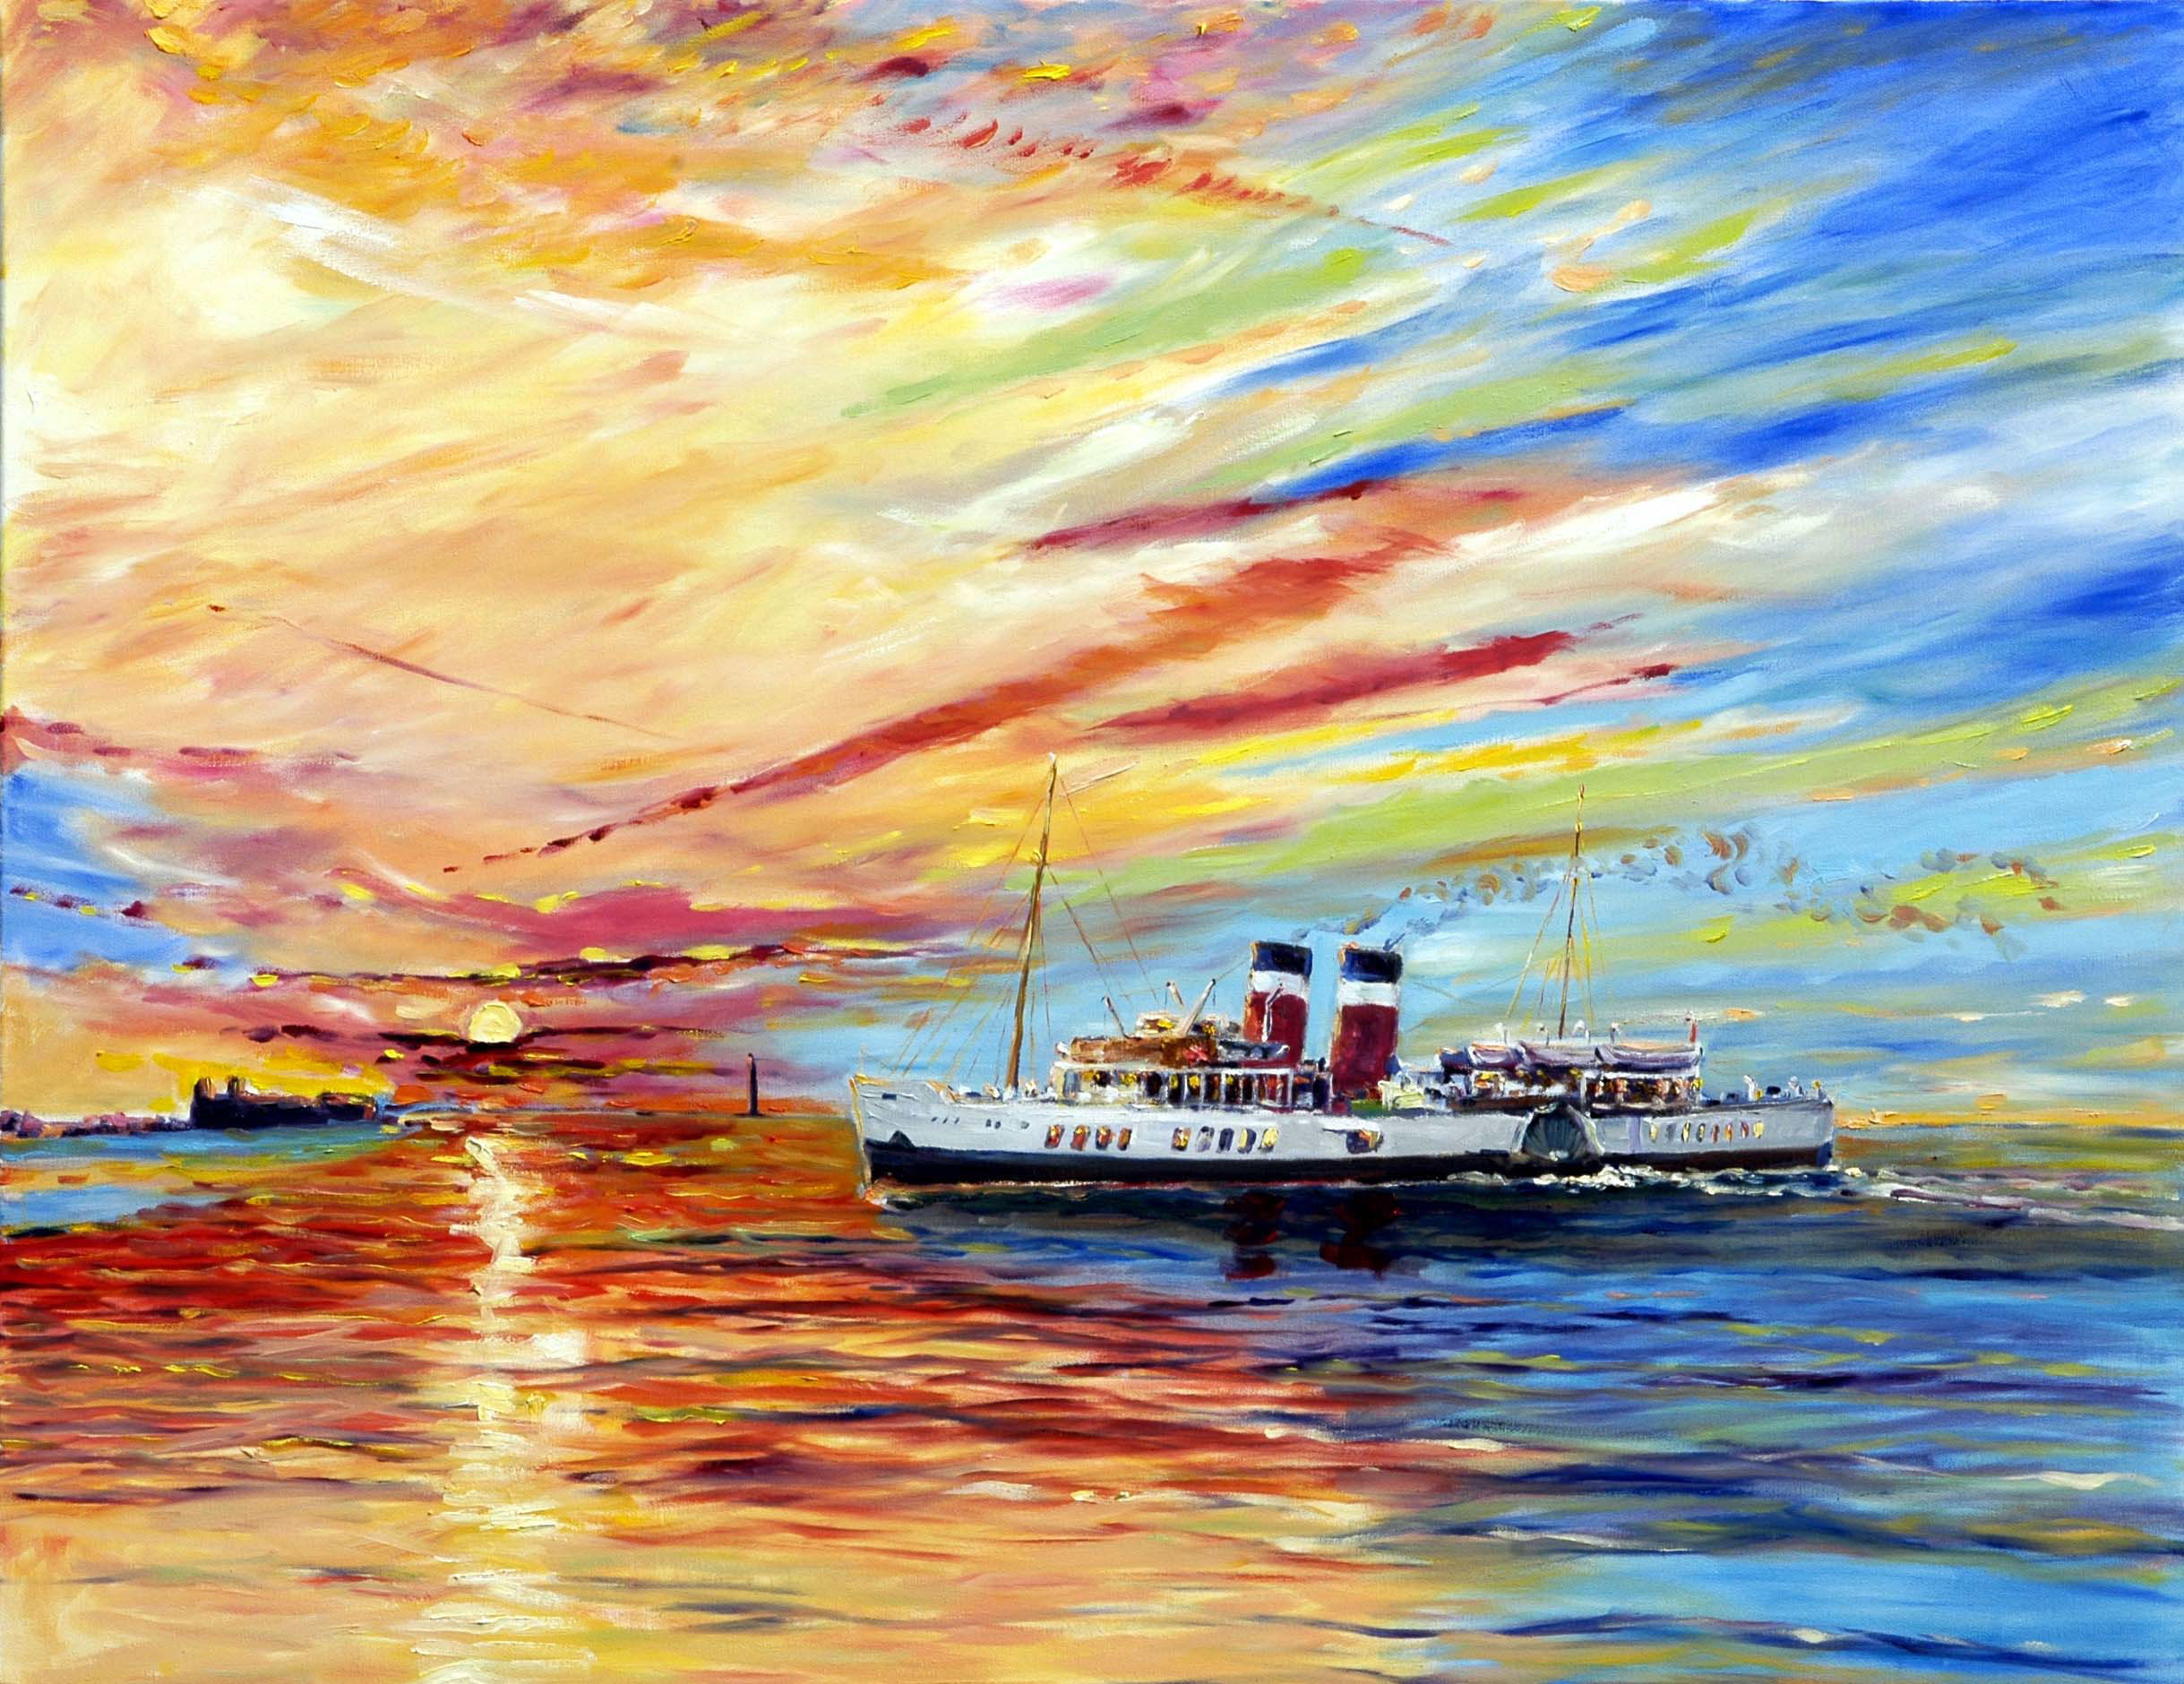 painting by roy munday, artist, of the steamship waverley entering the river mersey, liverpool, against a dramatic sunset